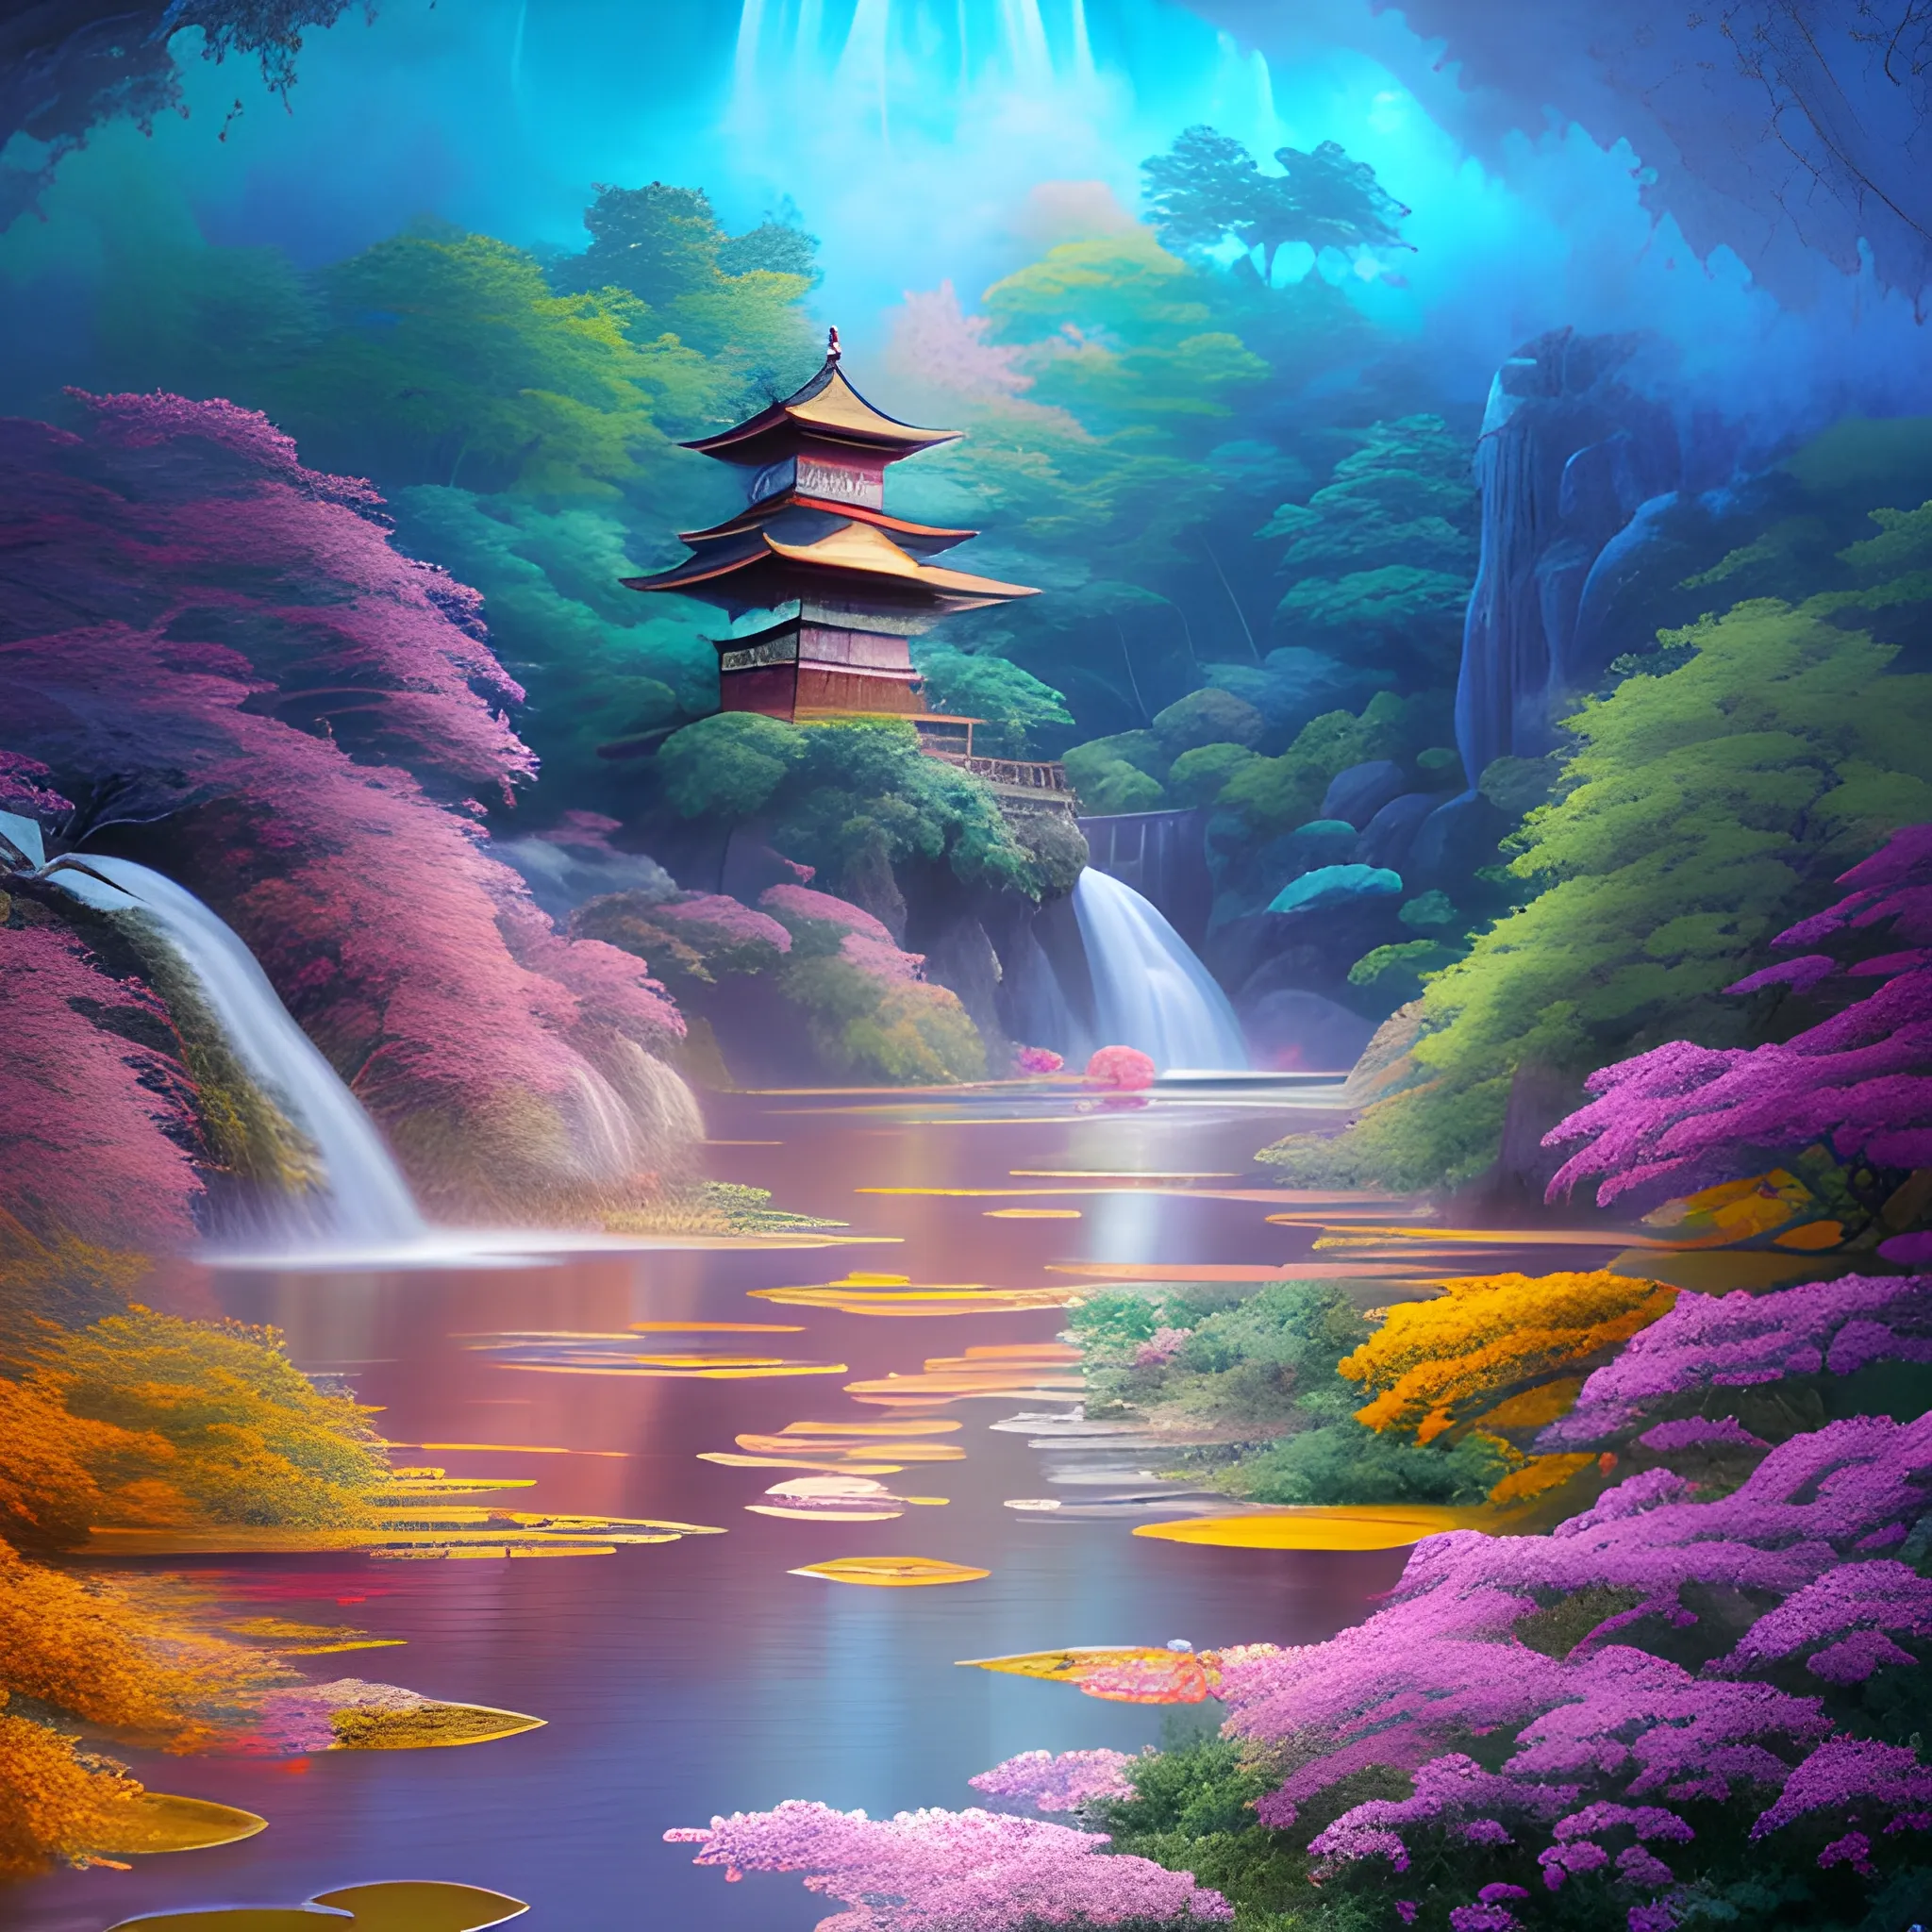 (by Ananta Mandal (and Andrew Biraj:0.5)), (in the style of nihonga), Style: Abstract, Medium: Digital illustration, Subject: An otherworldly landscape with floating islands, Ksitigarbha Bodhisattva at the middle of picture, cascading waterfalls, and vibrant flora and fauna. Camera Angle: Overhead shot capturing the vastness and intricate details of the scene. The colors are saturated, and the lighting creates a warm and ethereal atmosphere. The painting is highly detailed, with every brushstroke capturing the complexity of the imaginary world., (high quality), (detailed), (masterpiece), (best quality), (highres), (extremely detailed), (8k), seed:792315689